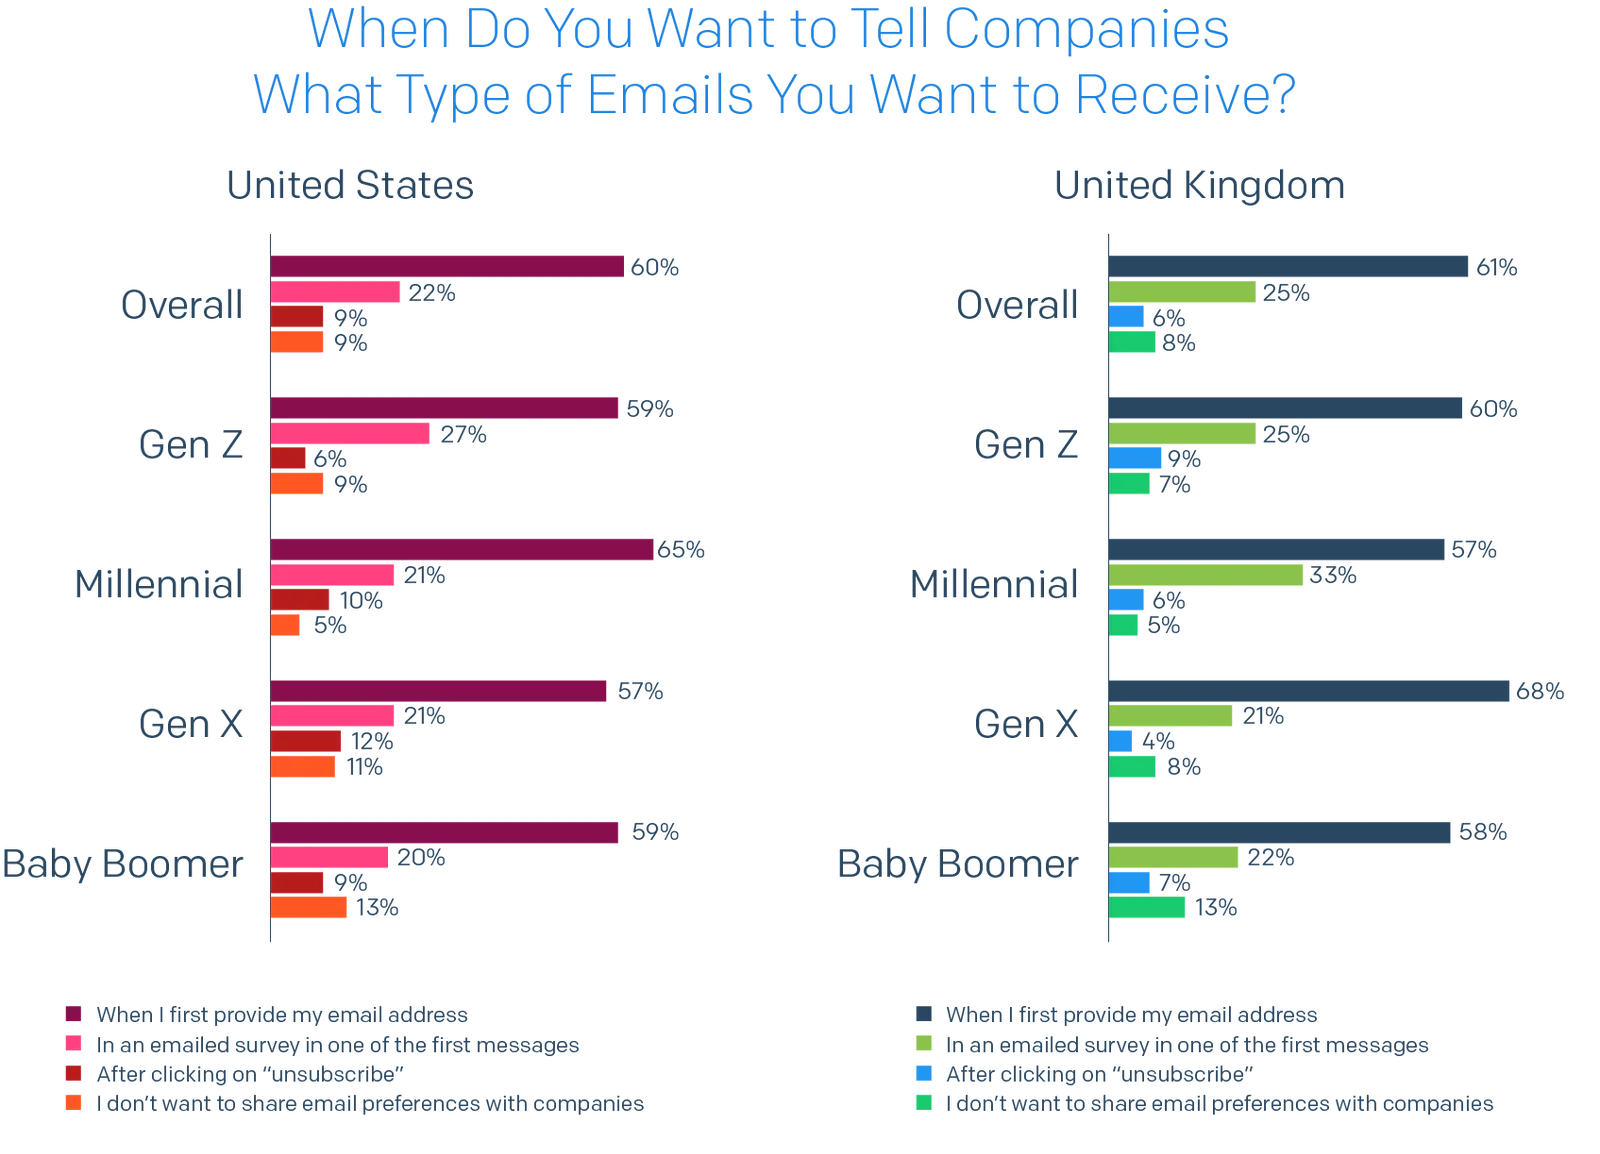 Bar chart of When do you want to tell companies what type of emails you want to receive? by country